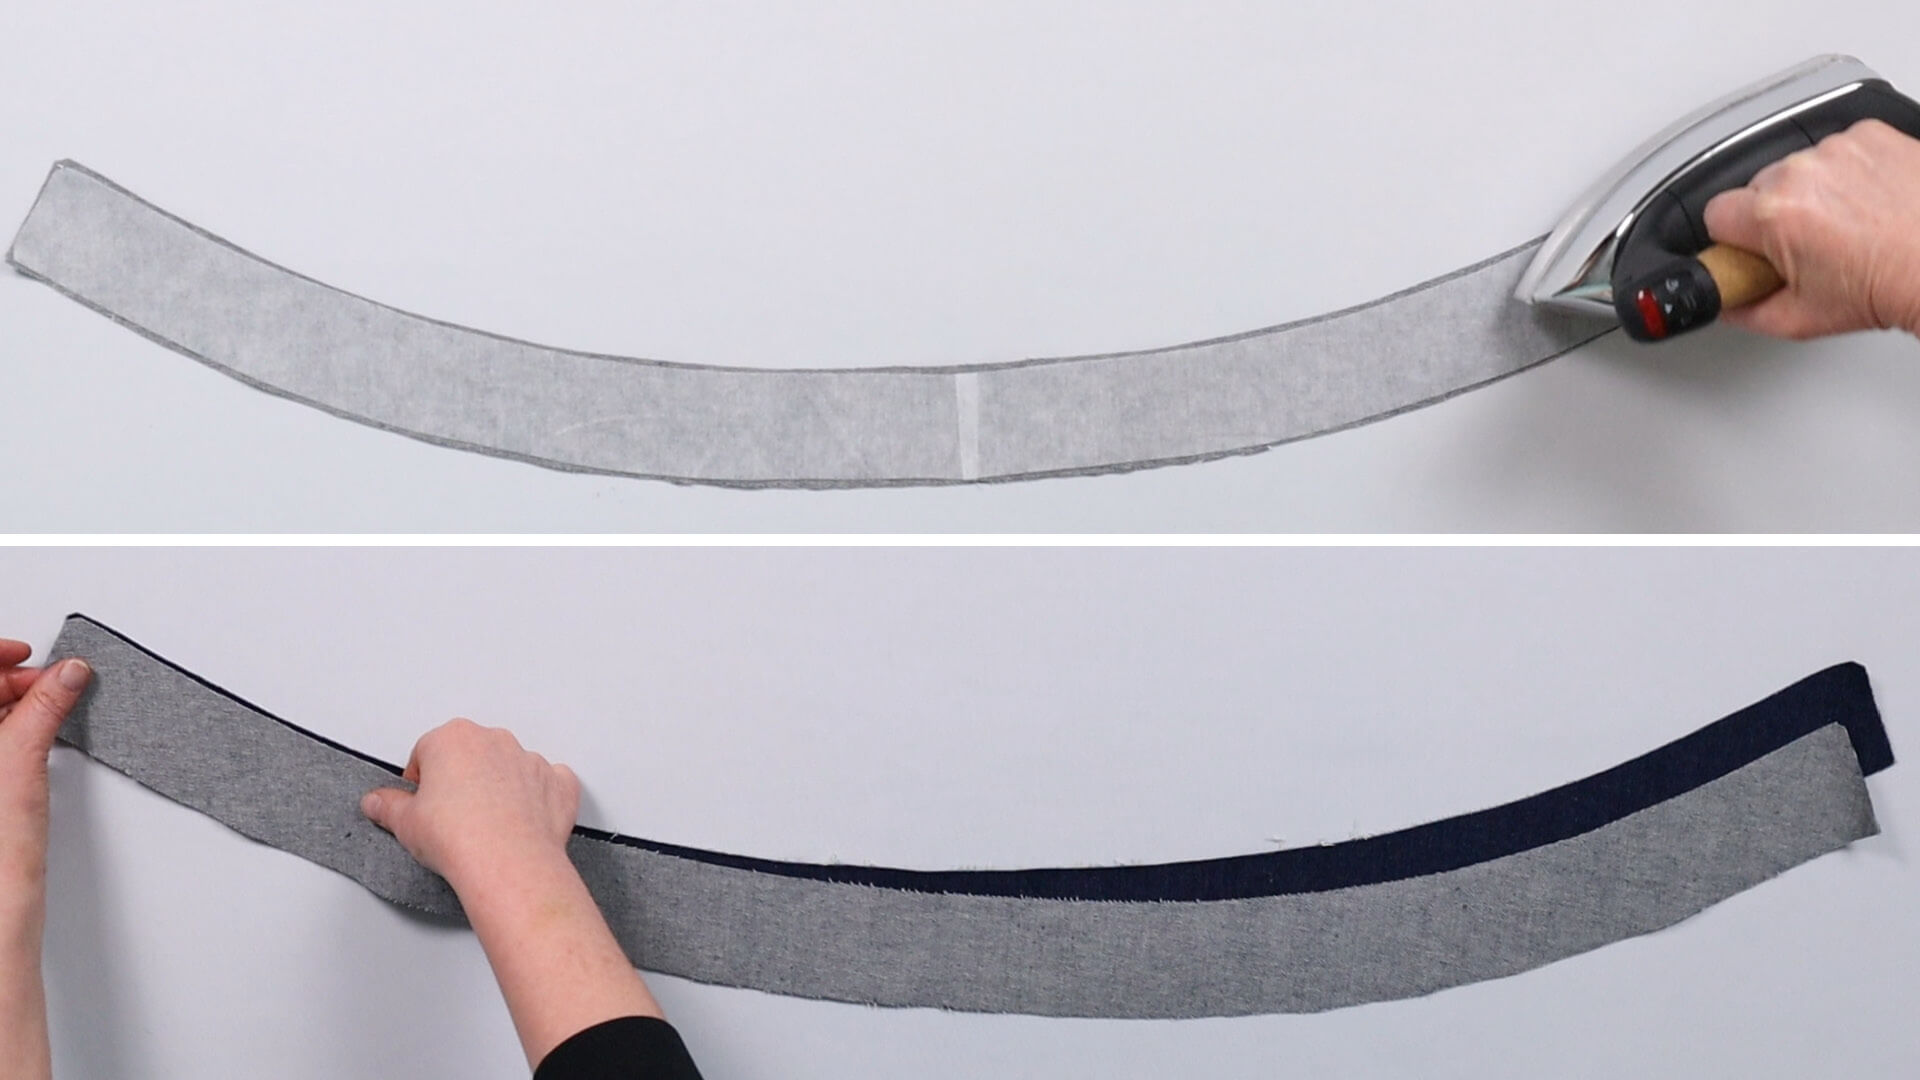 Interface the outside of the waistband and place the inner waistband strip right sides together